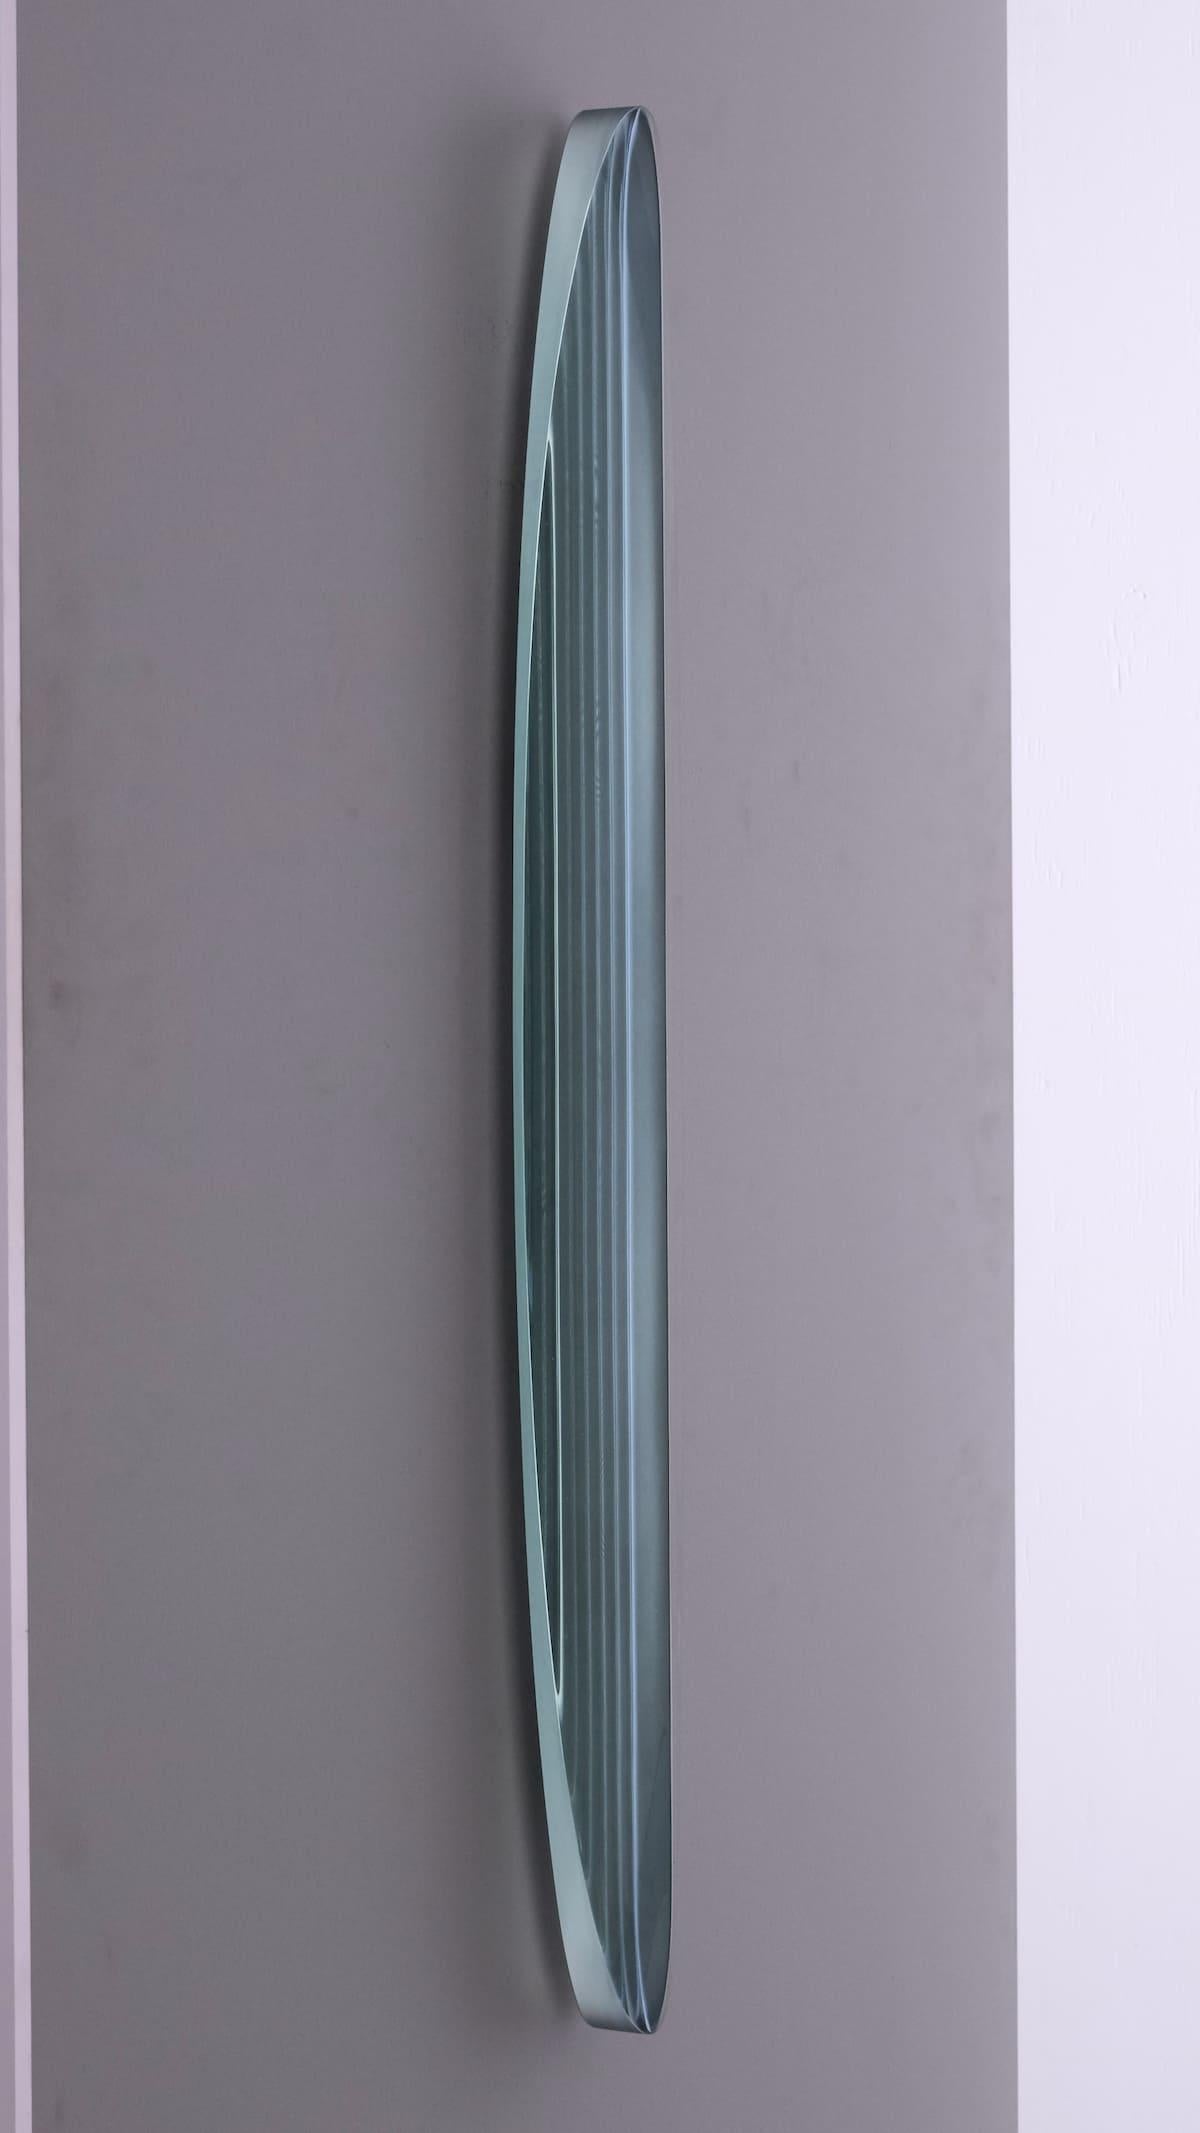 P.190501 by Toshio Iezumi - Contemporary glass sculpture, green, abstract For Sale 3